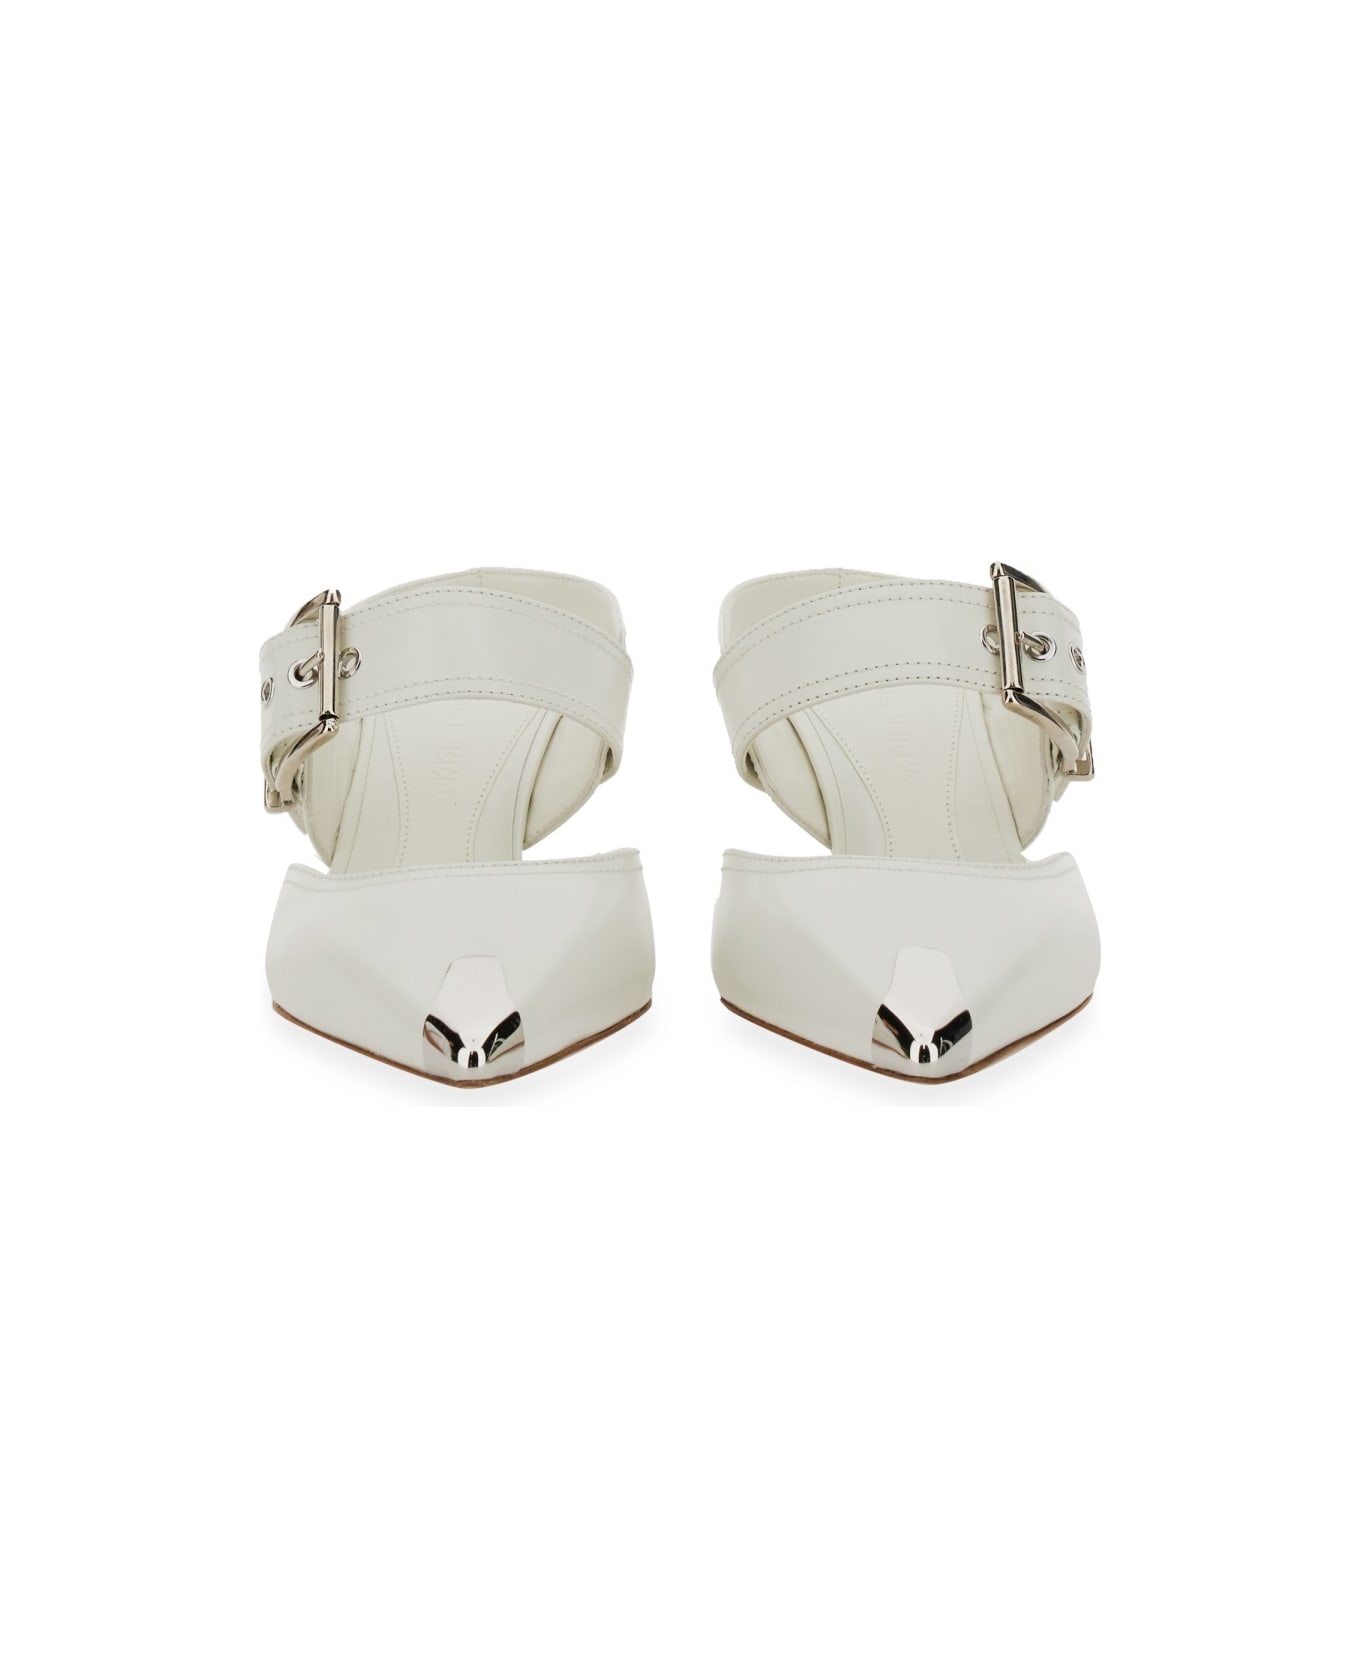 Alexander McQueen Punk Sandal With Buckle - WHITE